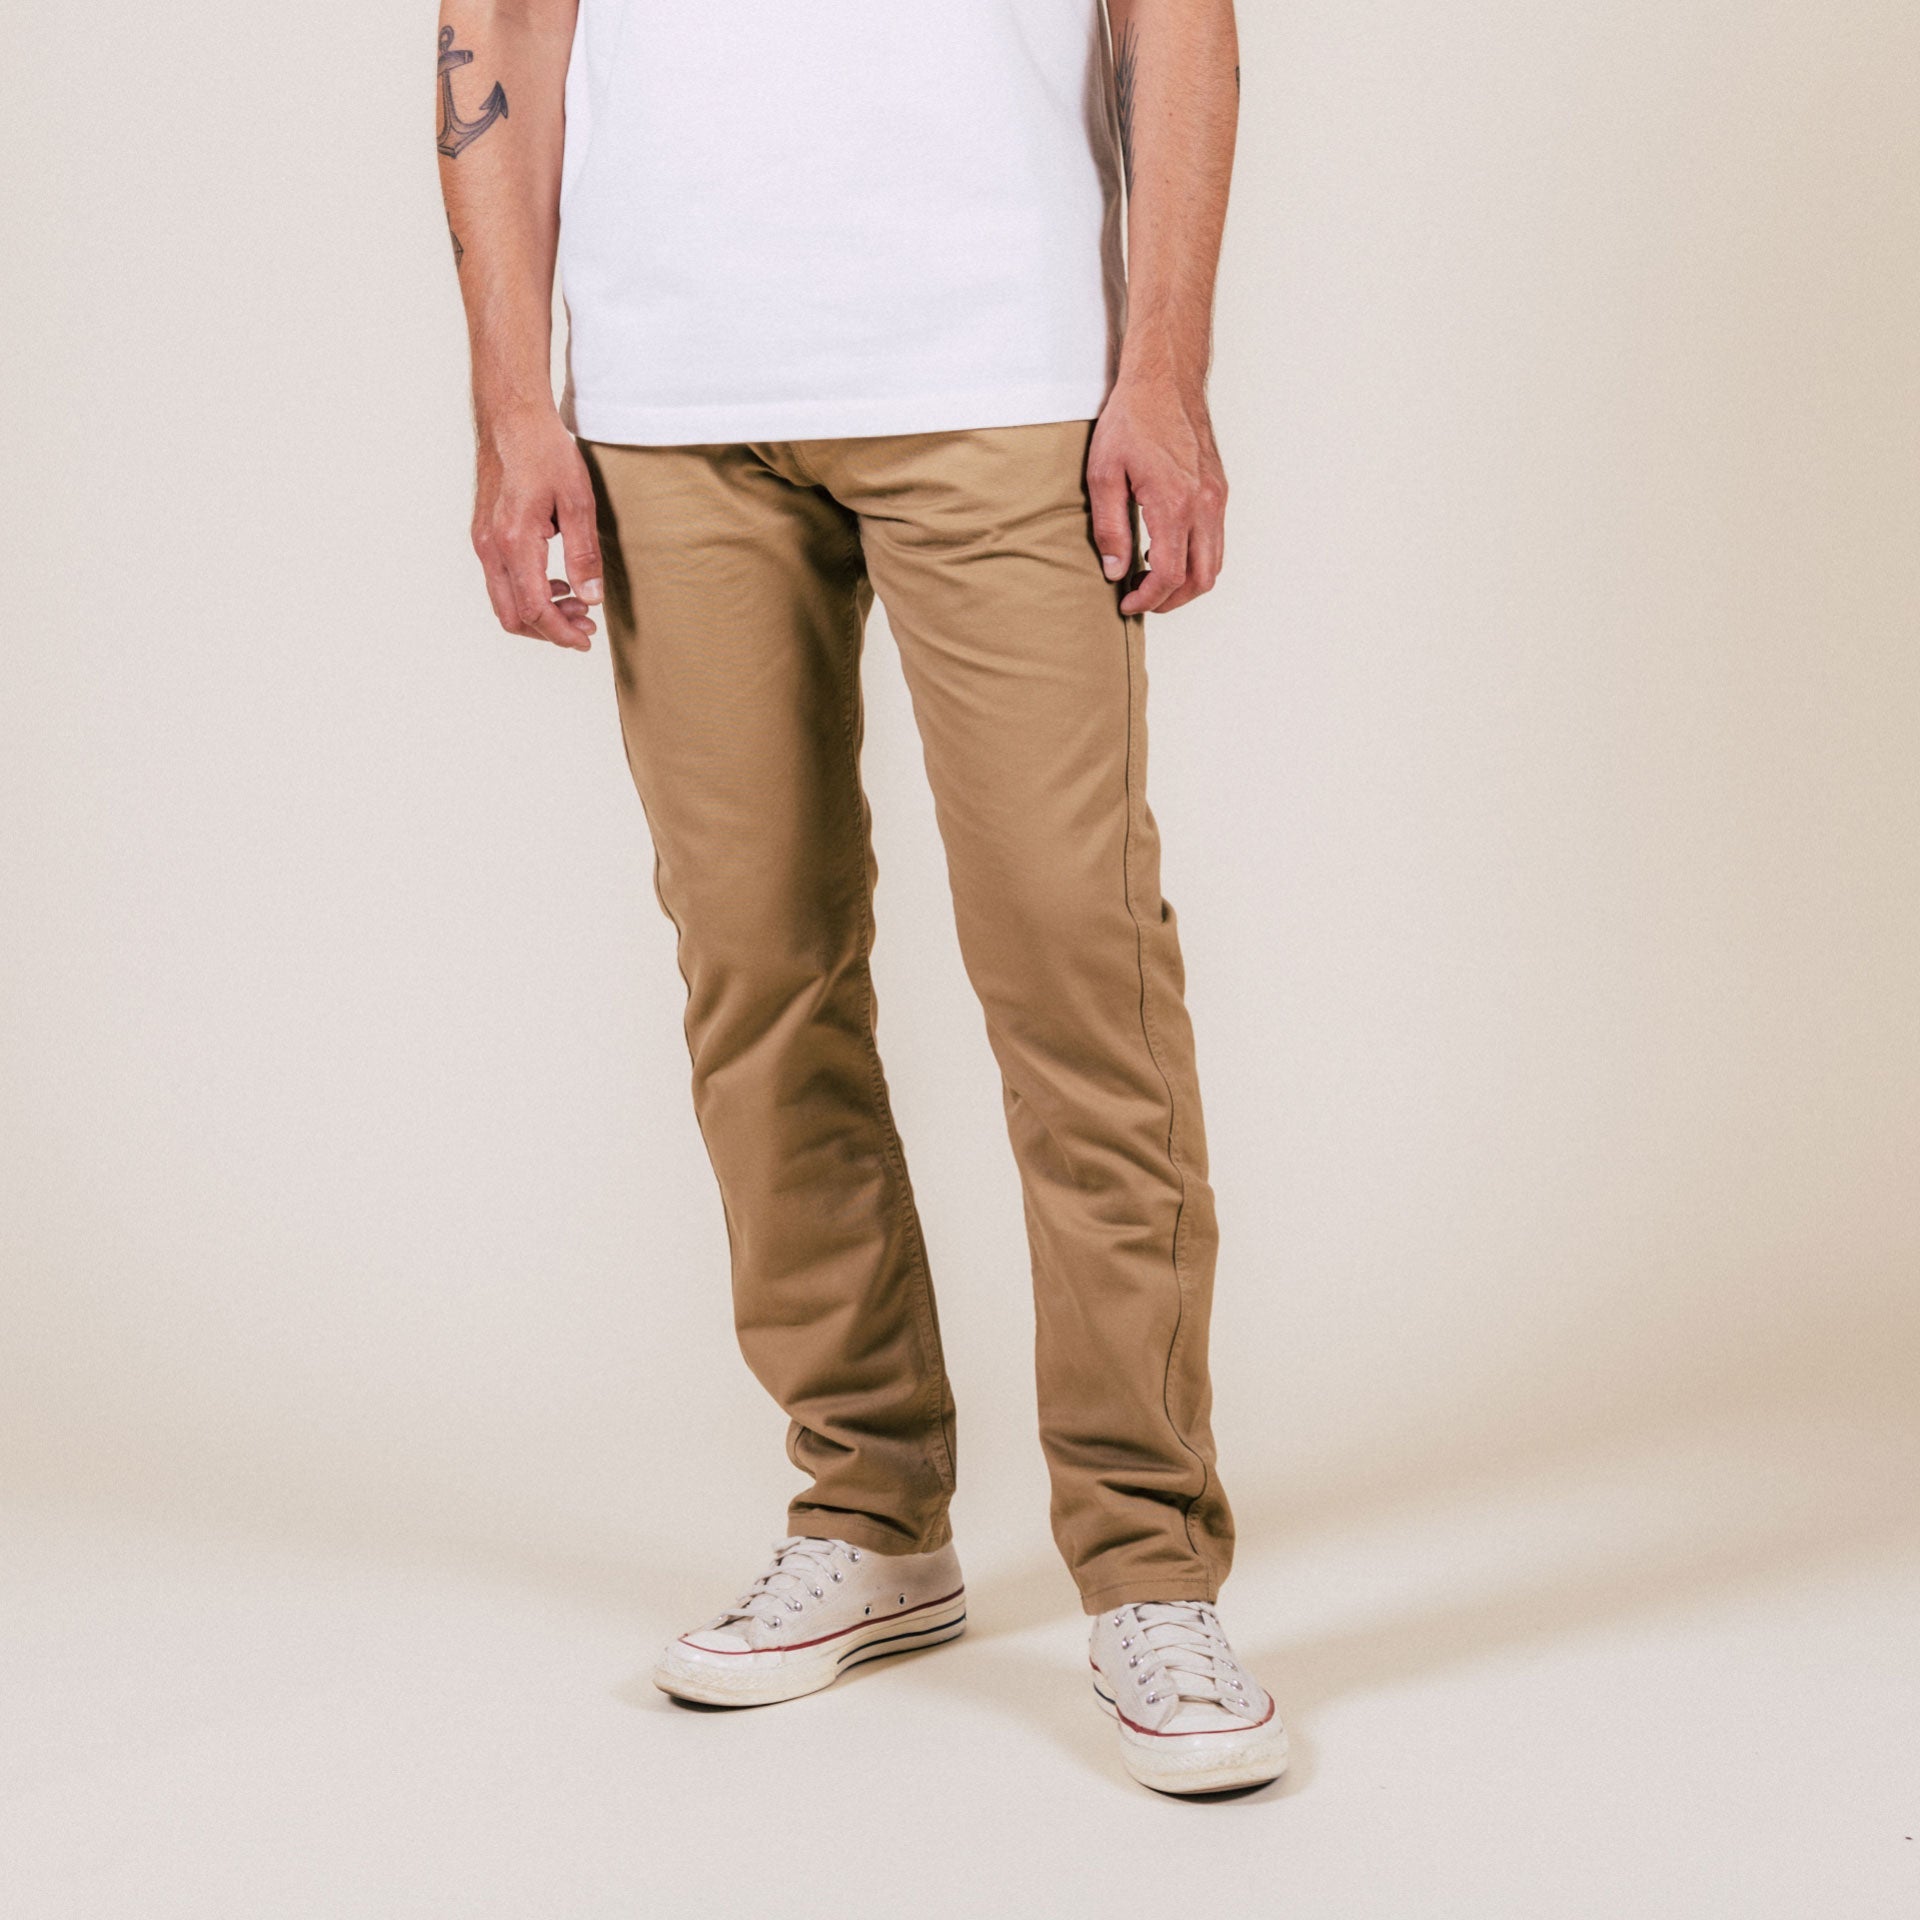 BC-04 RELAXED CHINO 8.5 oz. bronze brown sateen twill